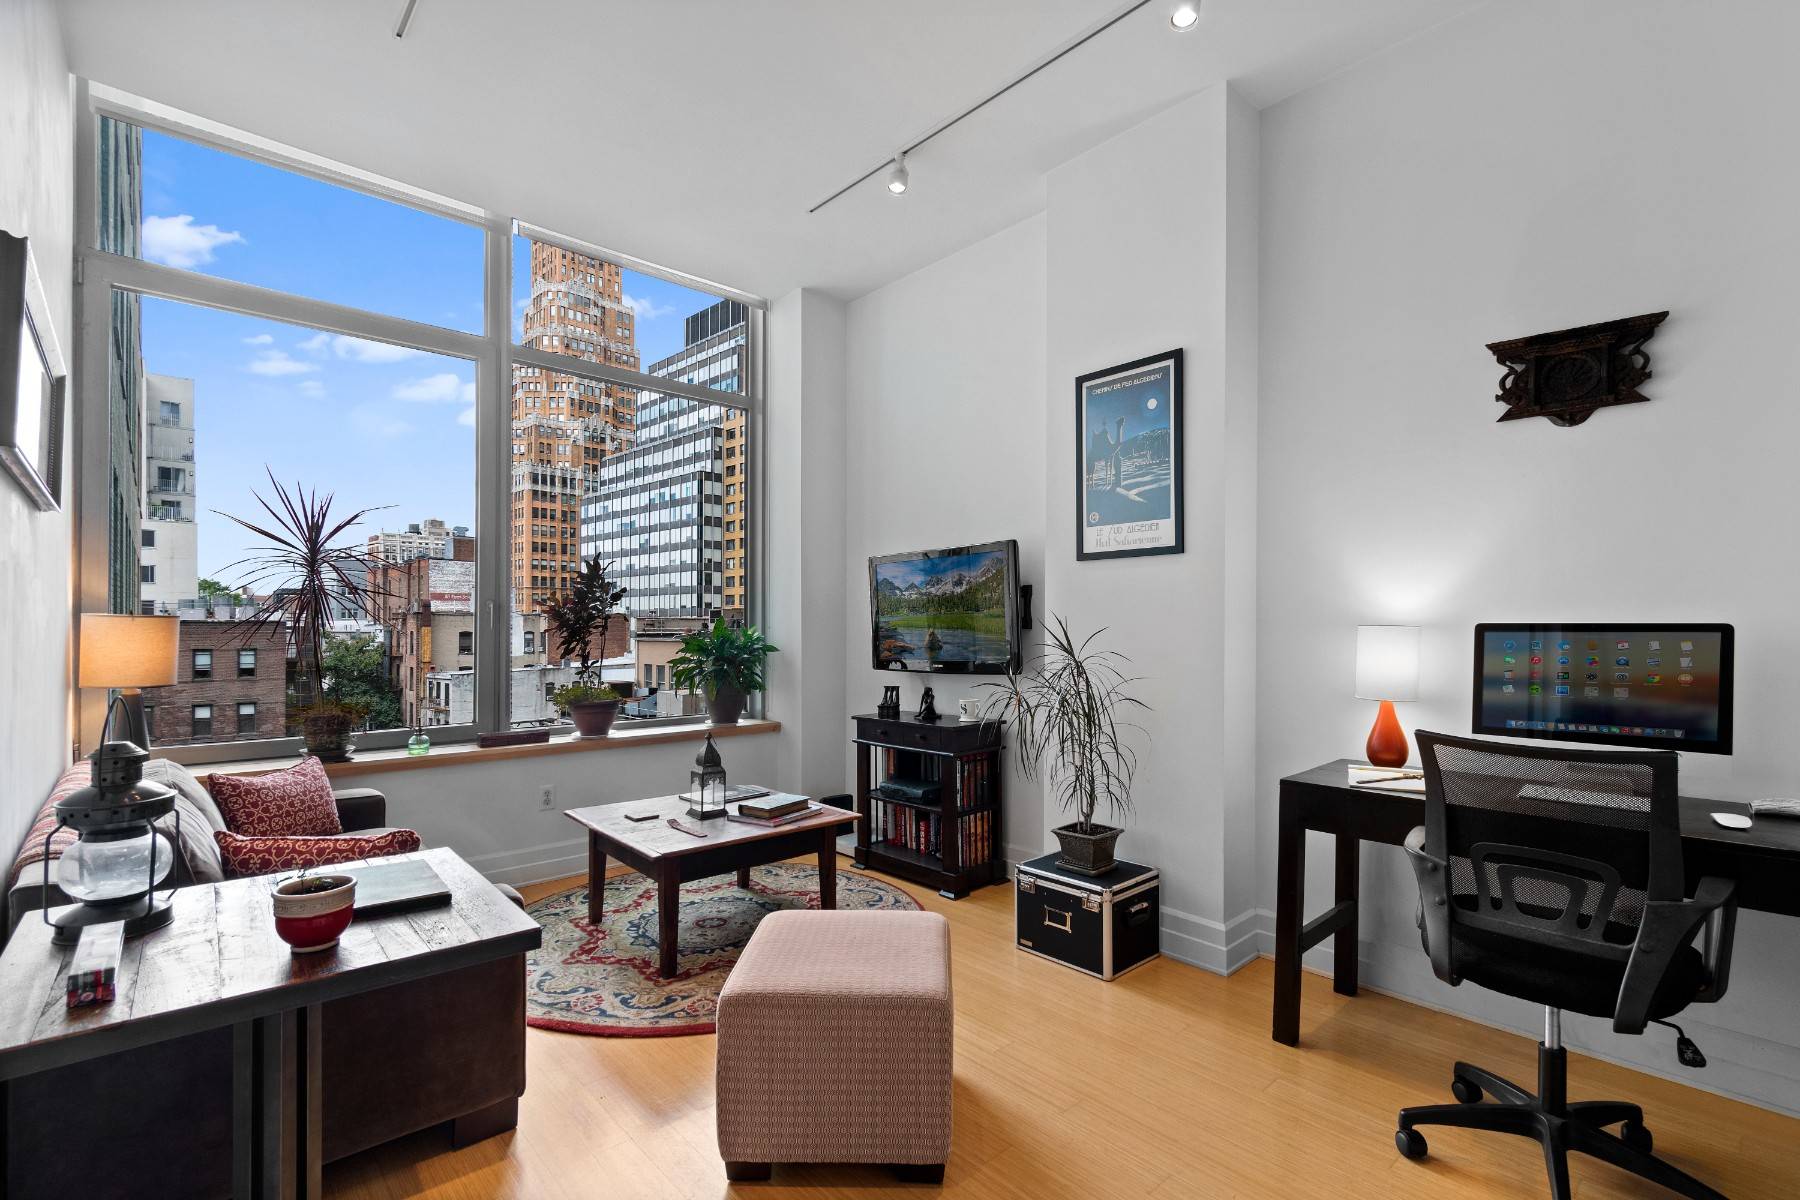 Located at 110 Livingston Street, in one of Downtown Brooklyns most exquisite buildings, is a very unique and beautiful condominium, unit 5P.